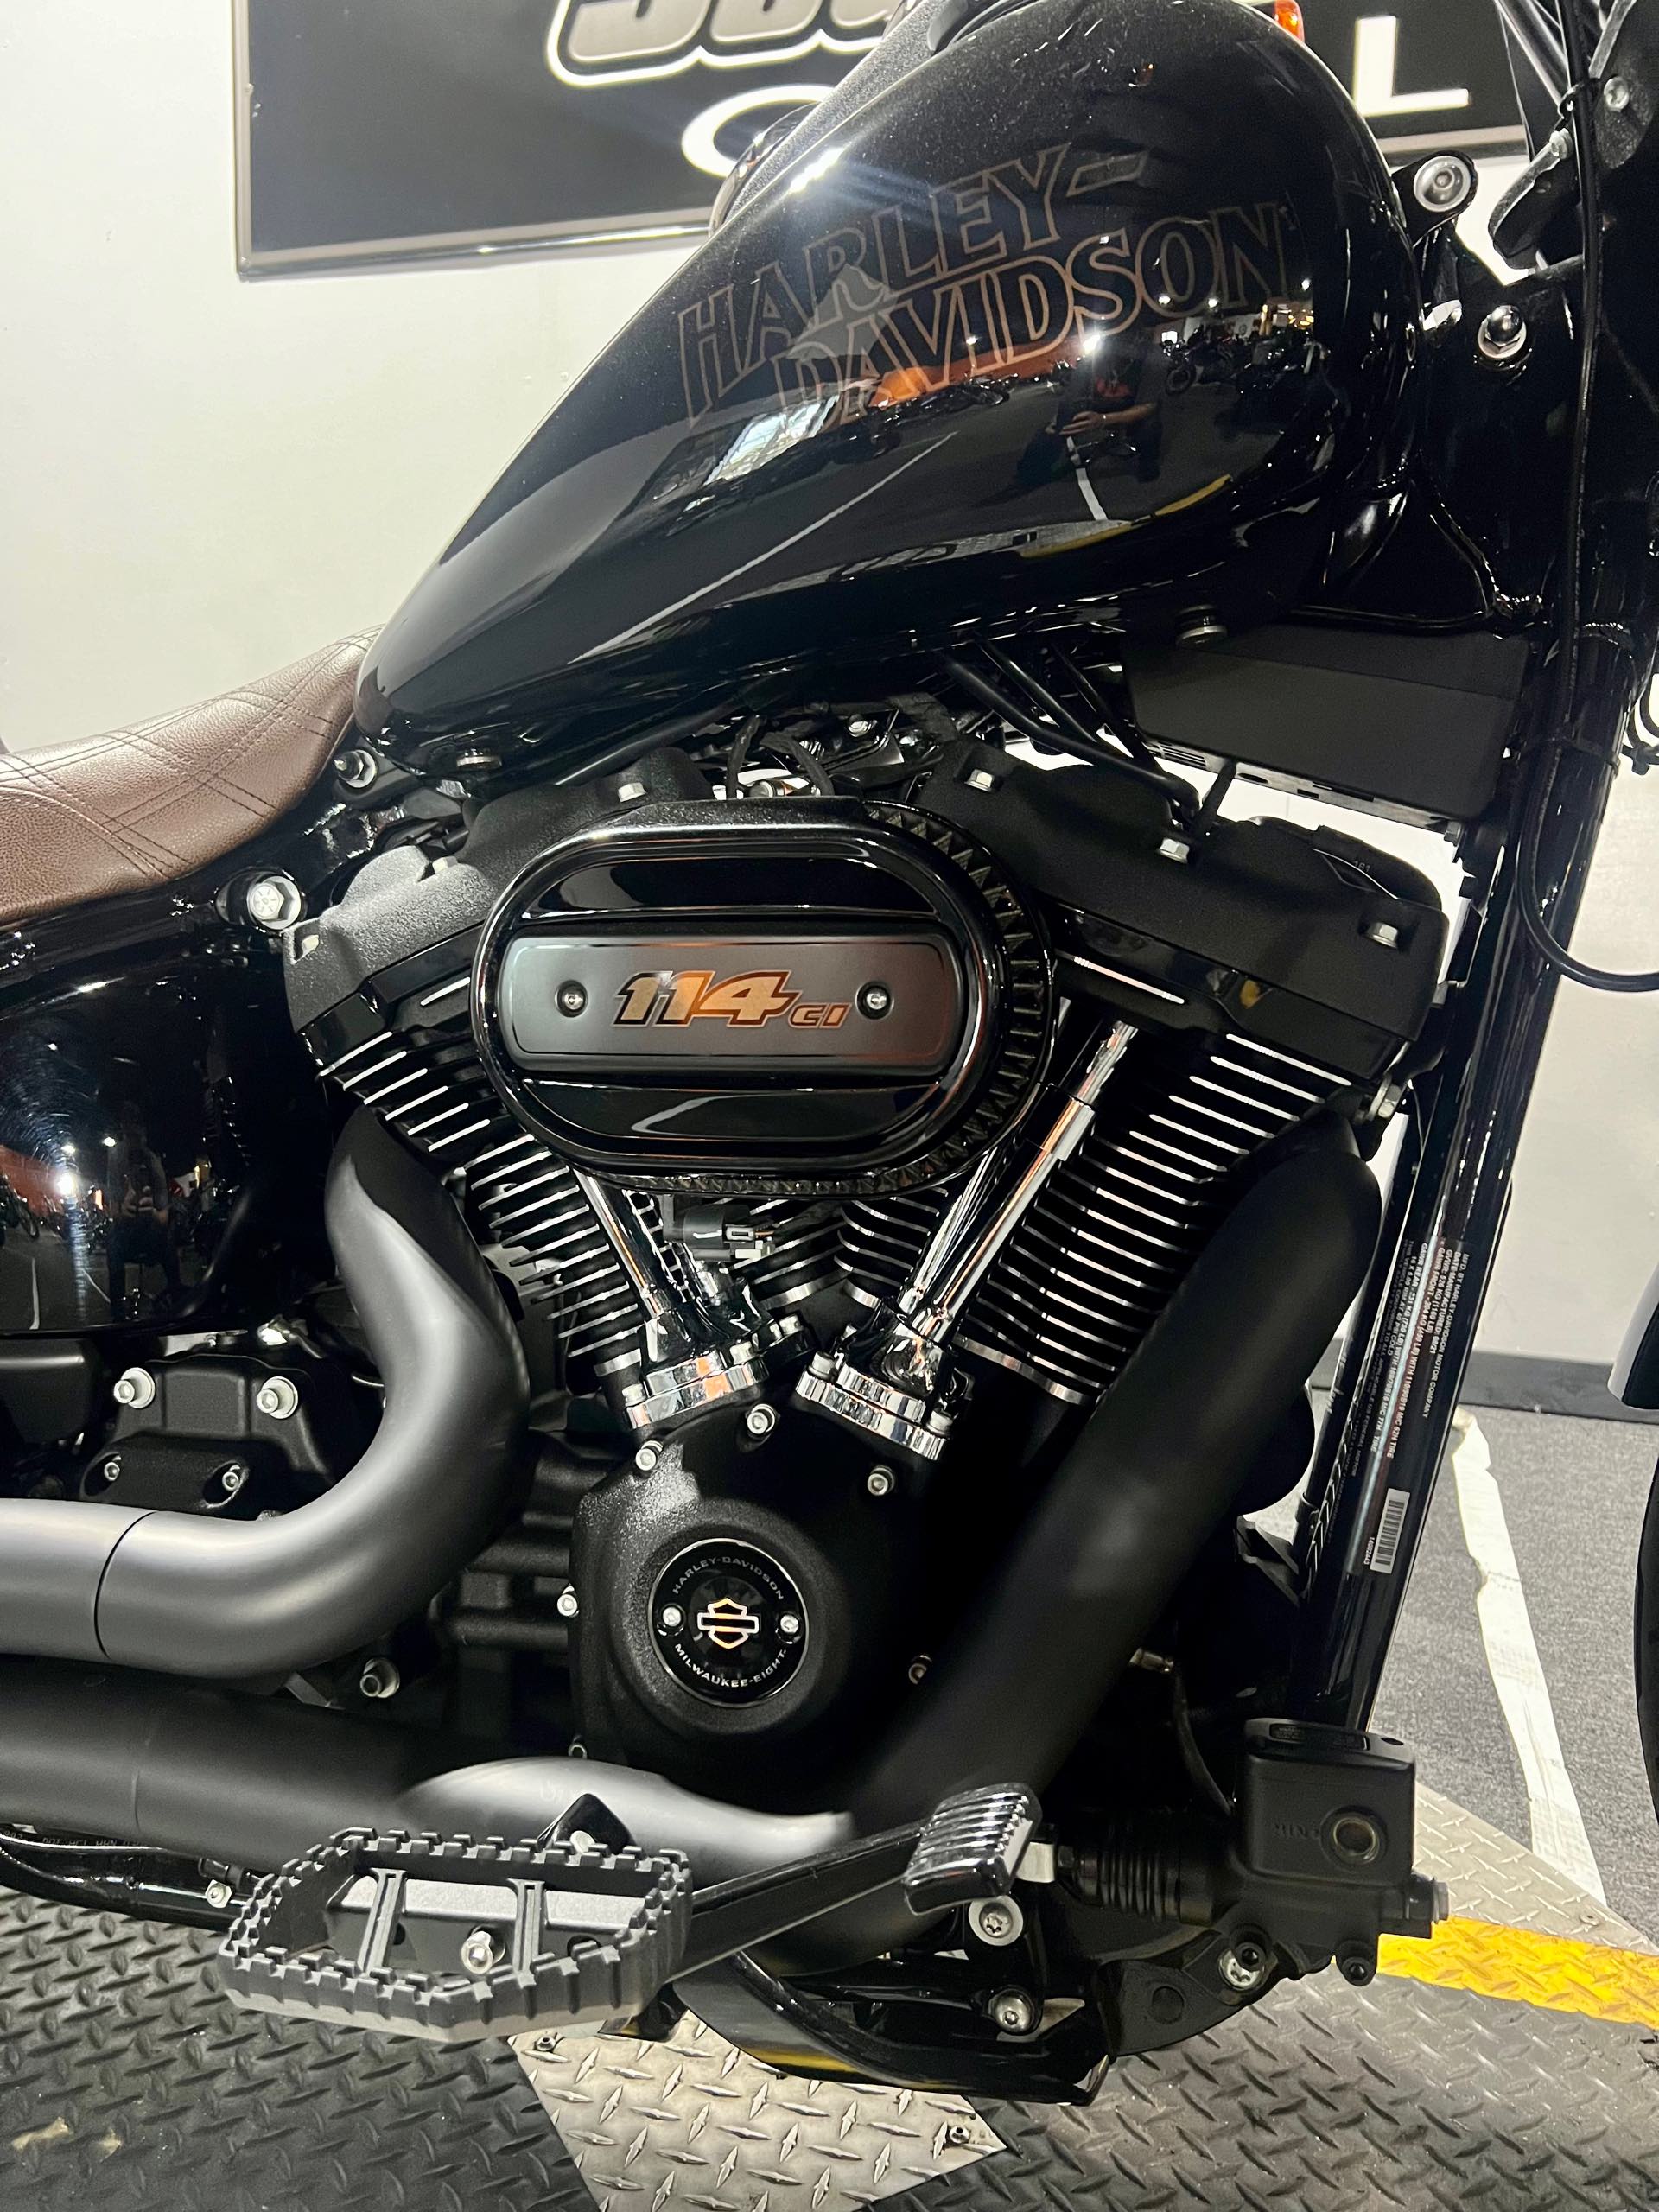 2021 Harley-Davidson Low Rider S at Southwest Cycle, Cape Coral, FL 33909